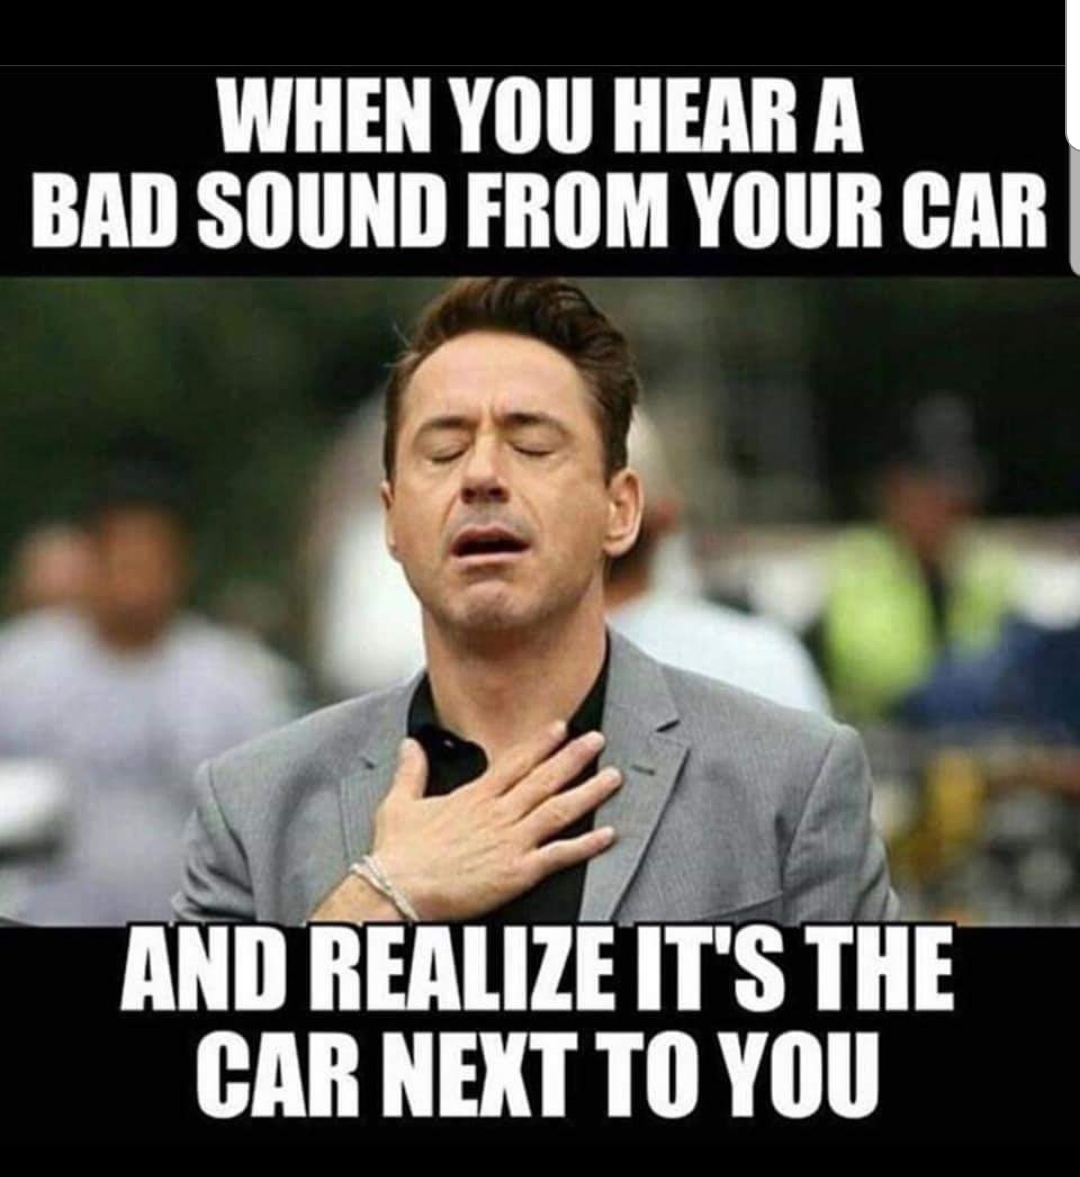 work meme about thinking your car is making weird sounds